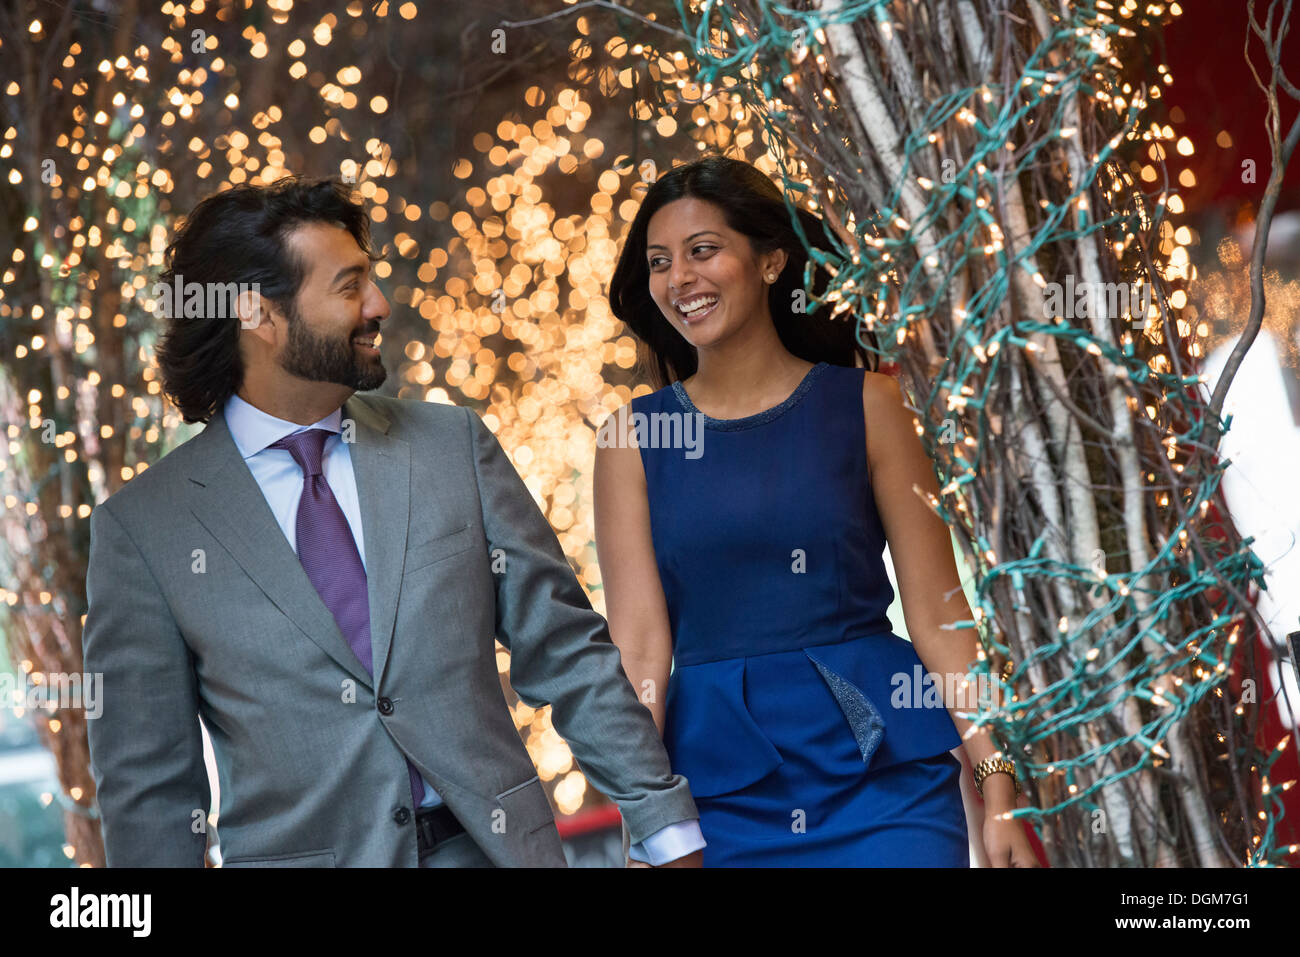 Business people. Two people, a man and woman holding hands and walking under a pergola, lit with fairy lights. Stock Photo